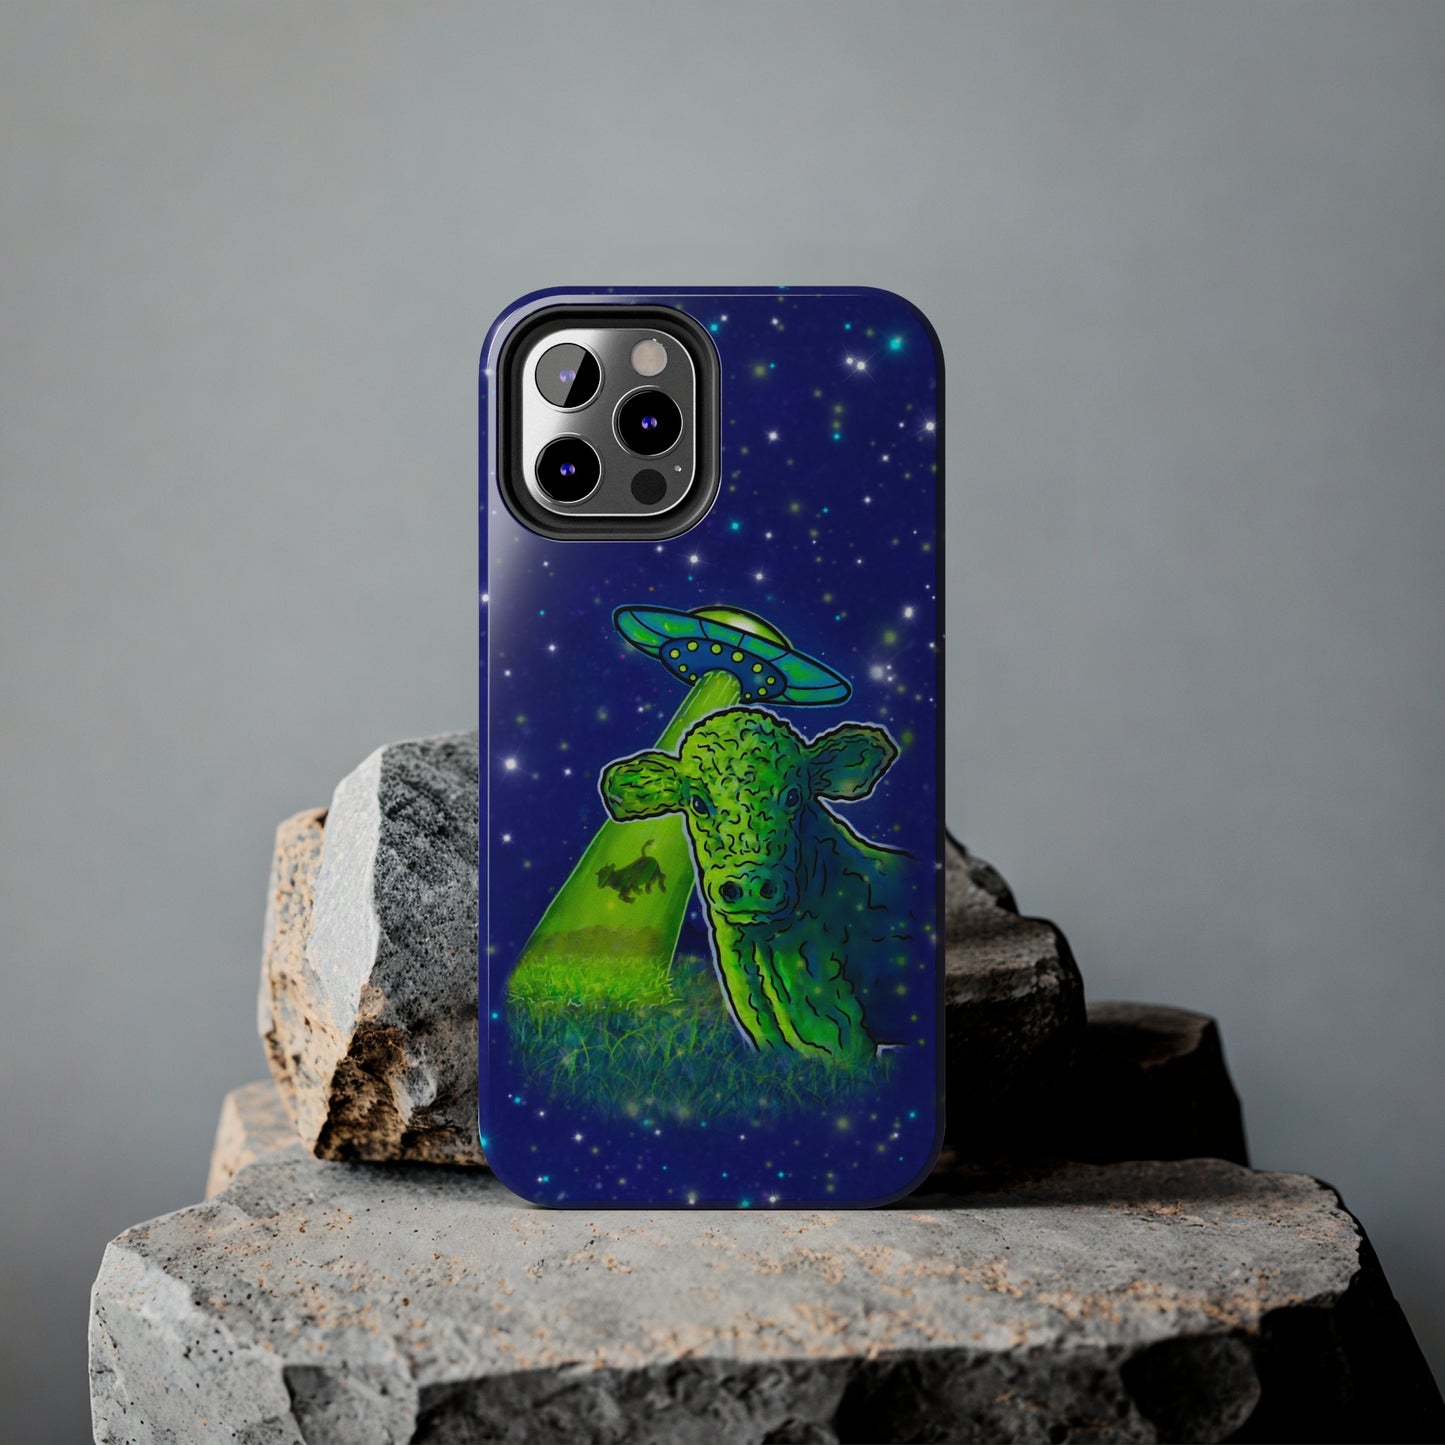 “Cows In Outer Space" iPhone Case - C.V. Designs Abducted Series